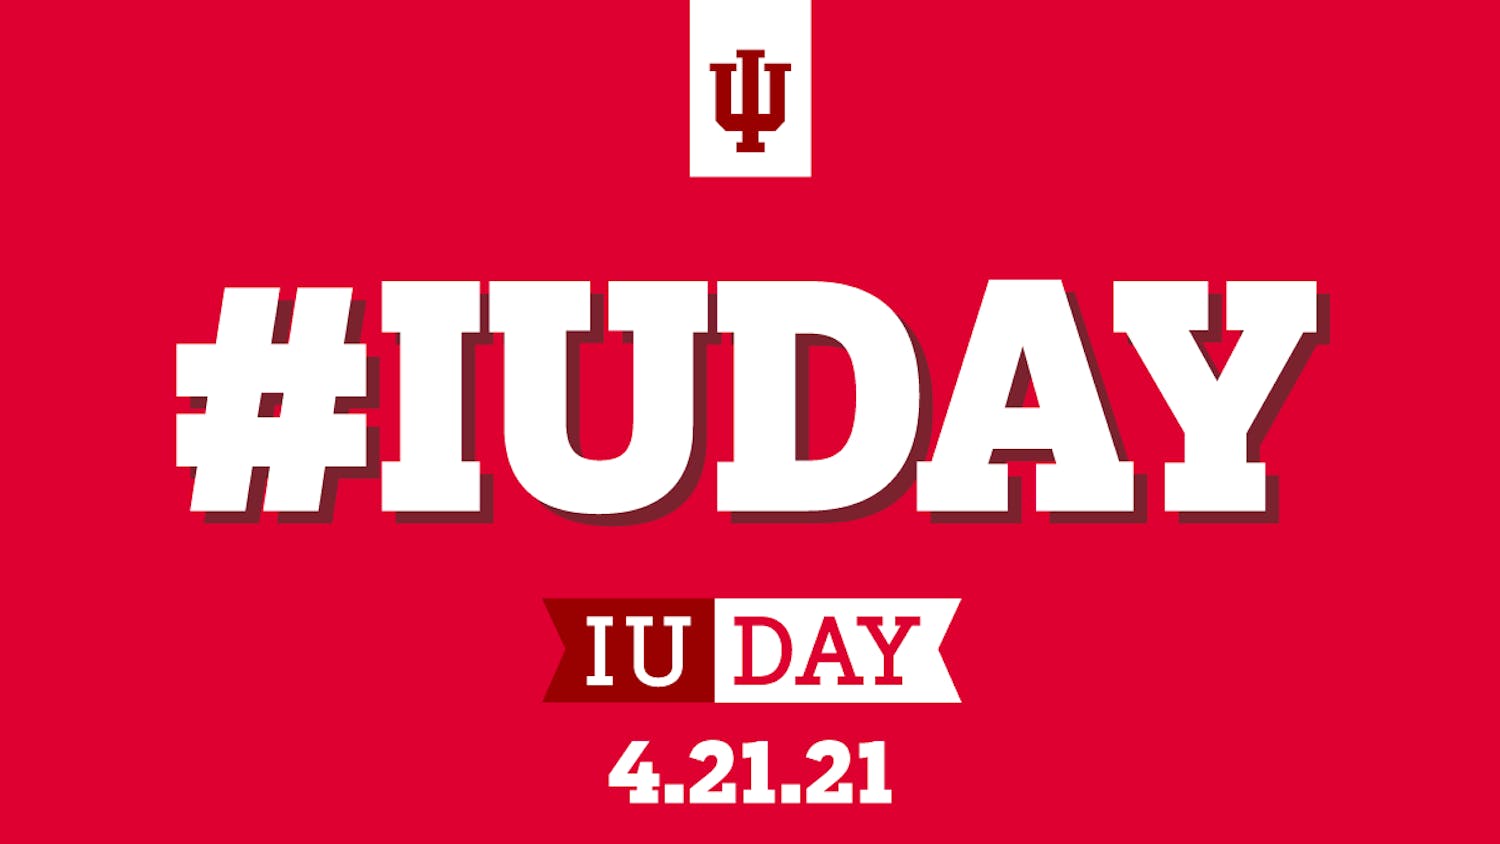 IU Day will take place on April 21, 2021.